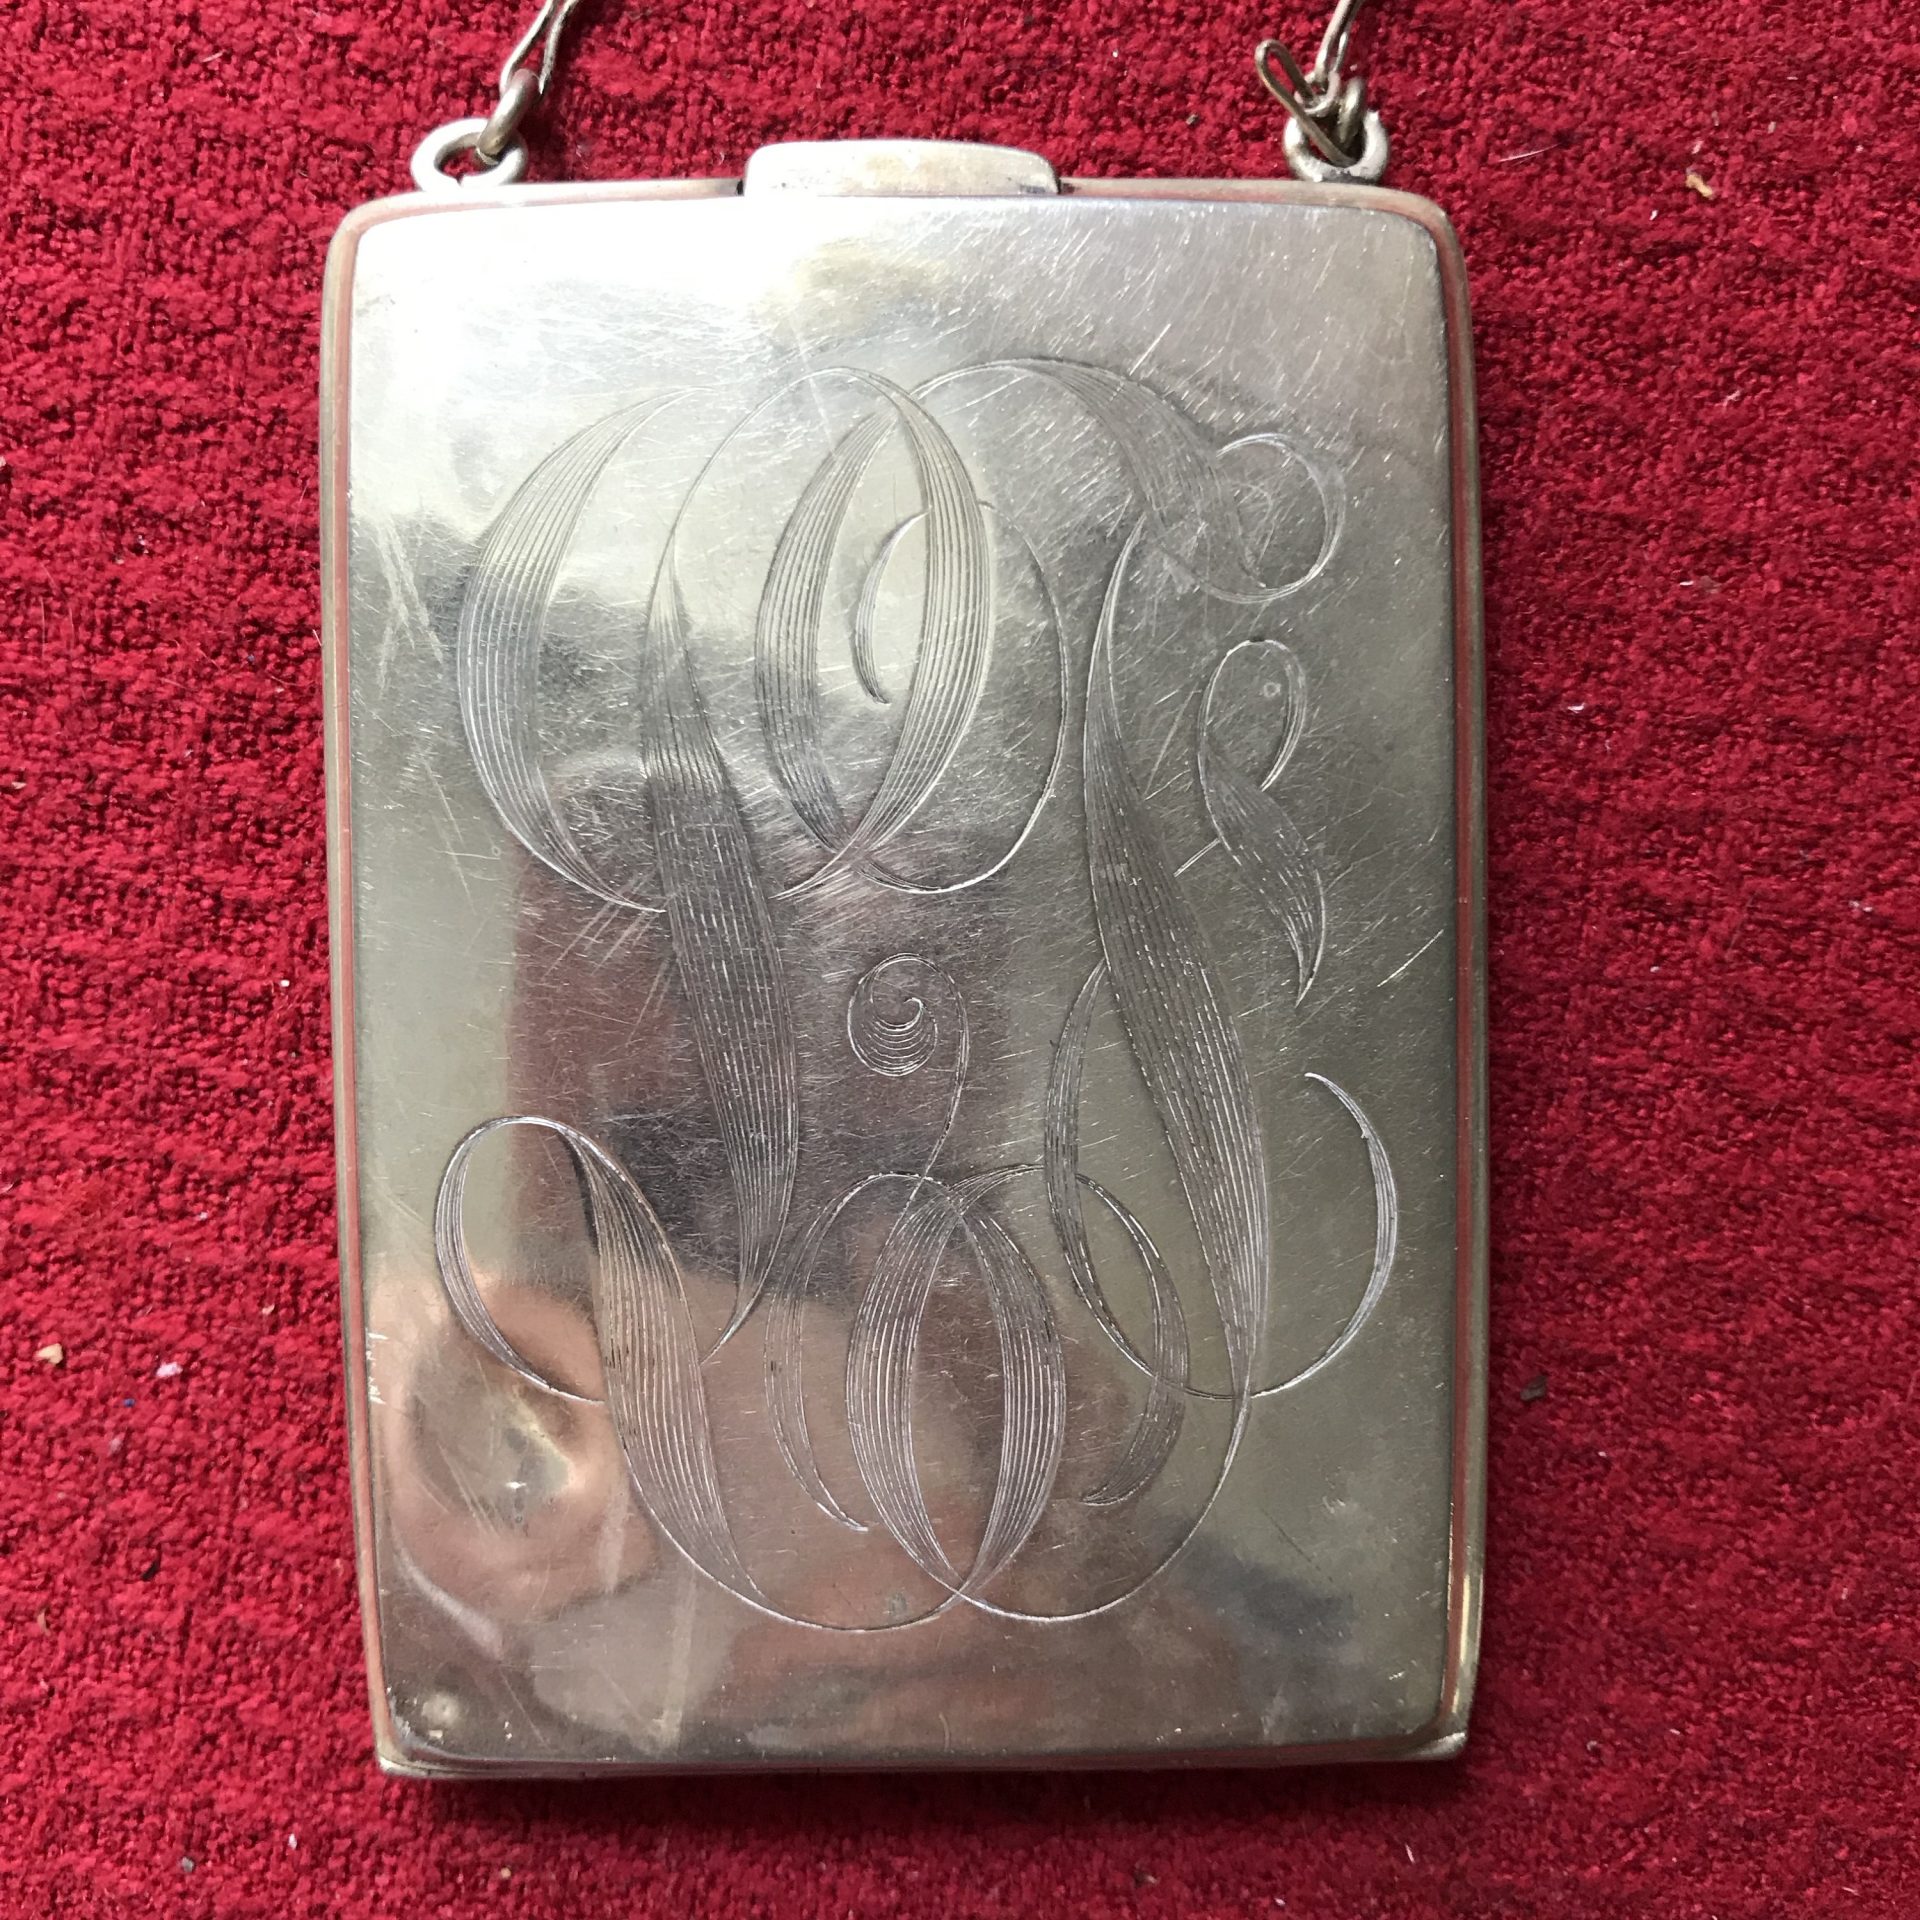 antique sterling silver money coin purse monogrammed hold bills coins has mirror and powder compartment collectible 1918 60992ced9 scaled